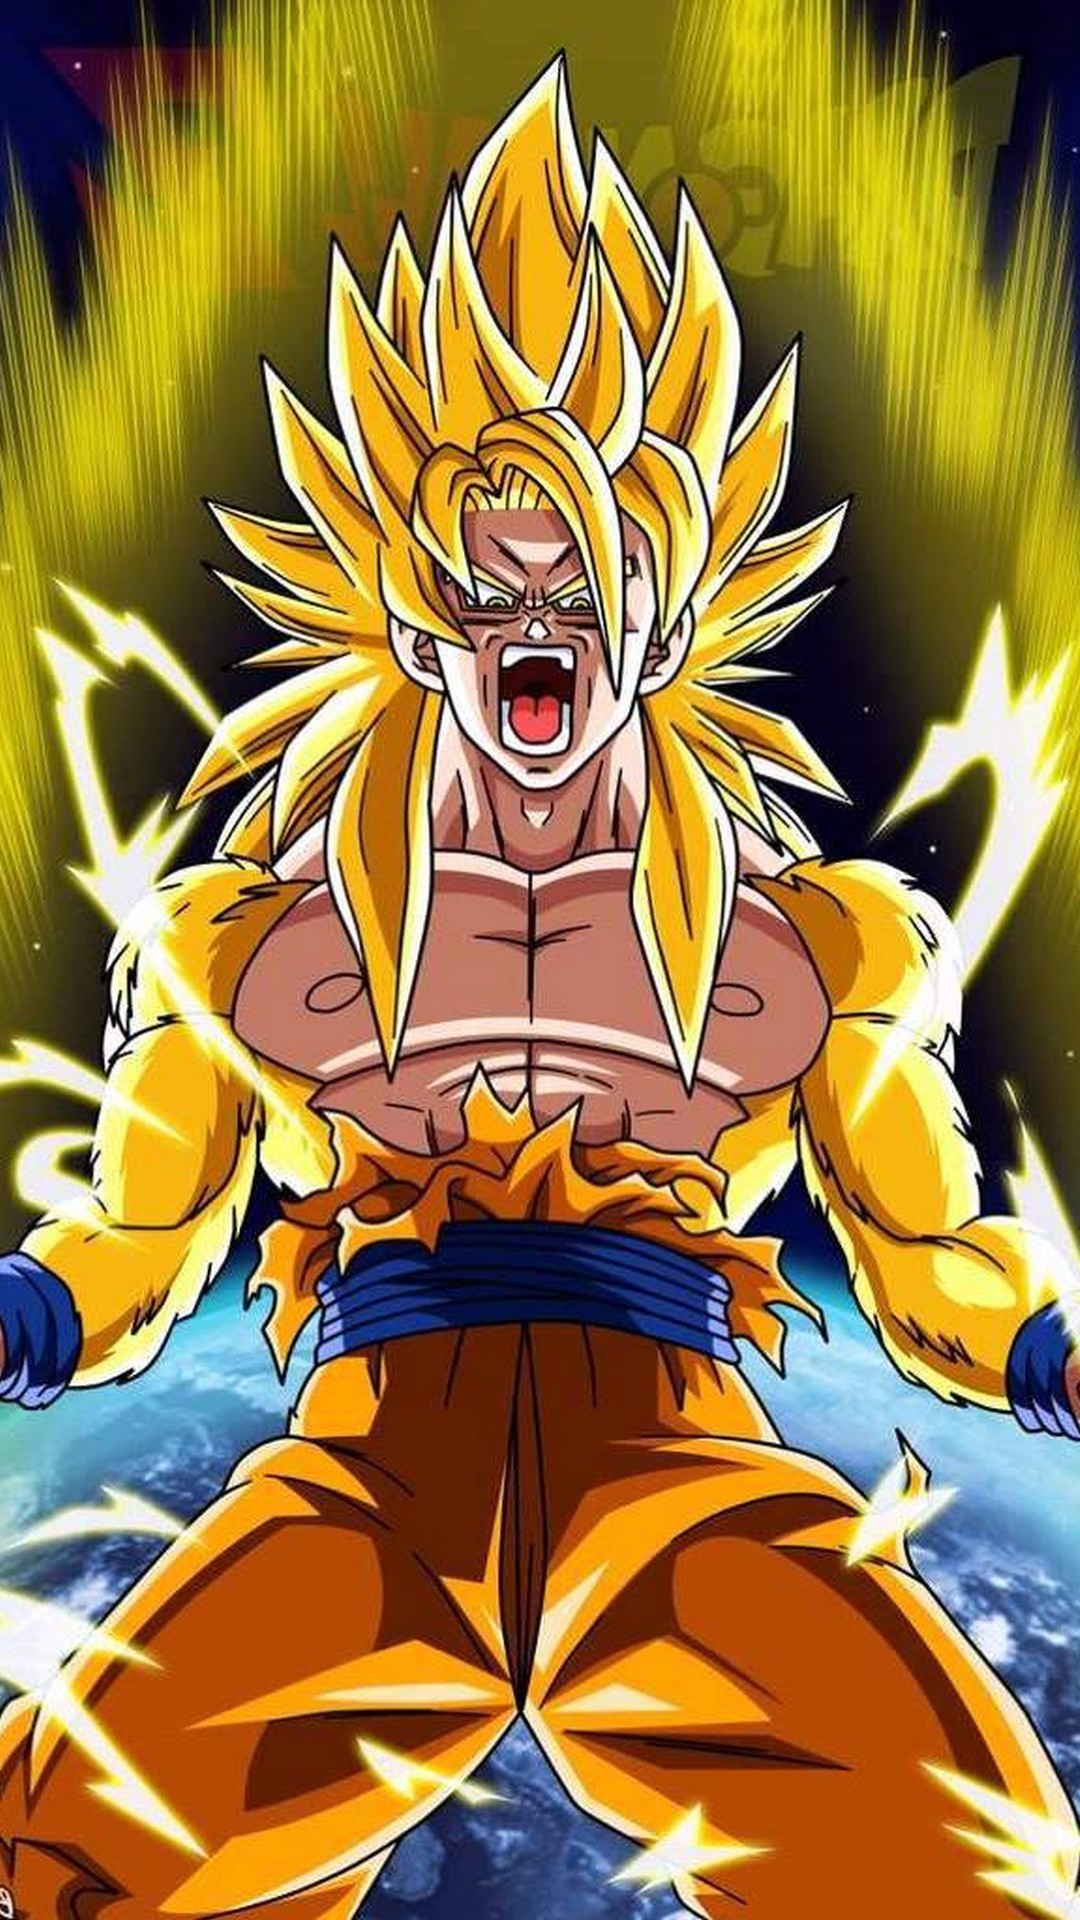 Goku SSJ3 Wallpaper For iPhone with resolution 1080X1920 pixel. You can make this wallpaper for your iPhone 5, 6, 7, 8, X backgrounds, Mobile Screensaver, or iPad Lock Screen